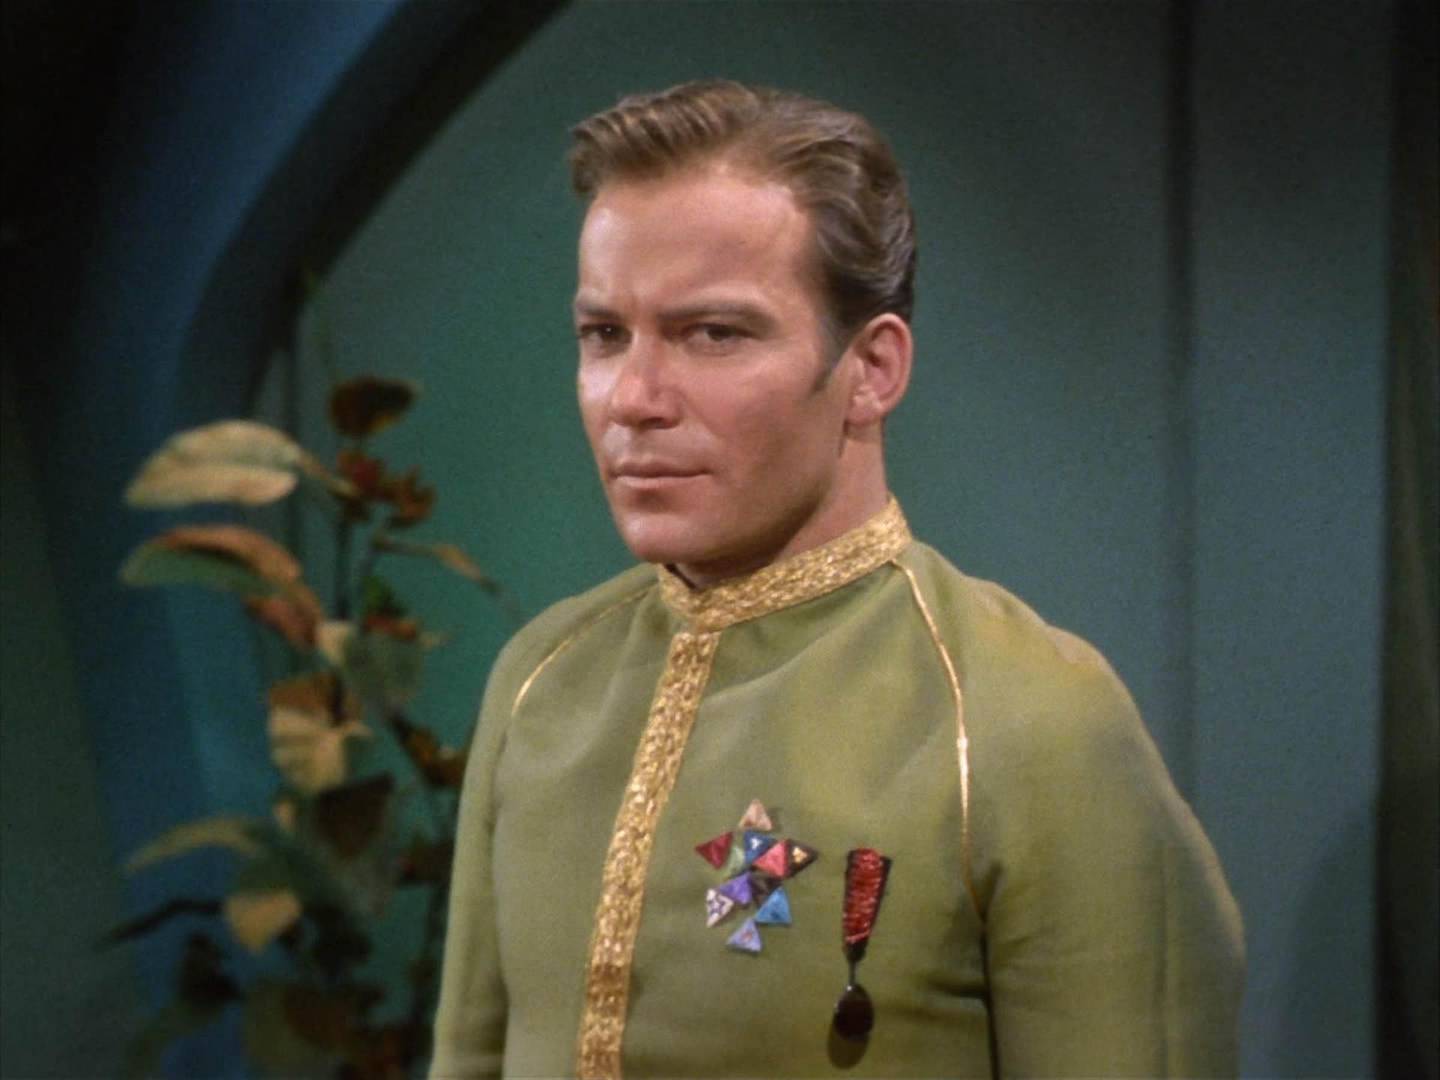 LOS ANGELES - FEBRUARY 16: William Shatner as Captain James T. Kirk on the Star Trek: The Original Series episode "Space Seed." Original air date February 16, 1967.  Image is a frame grab. (Photo by CBS via Getty Images) 